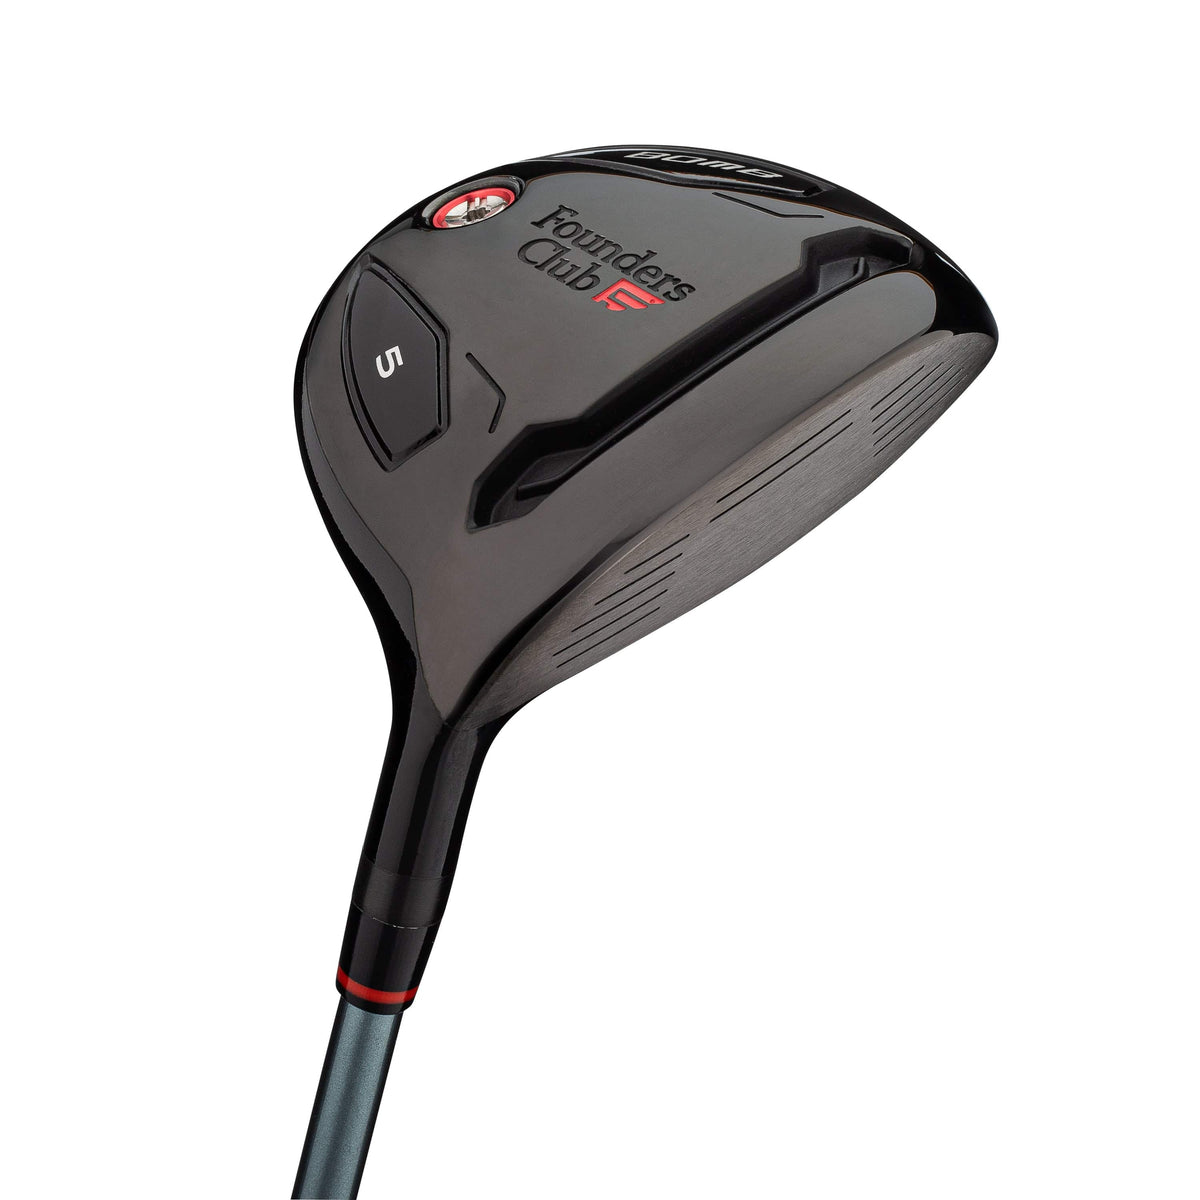 Founders Club Golf Bomb 5 Fairway Wood with Head Cover